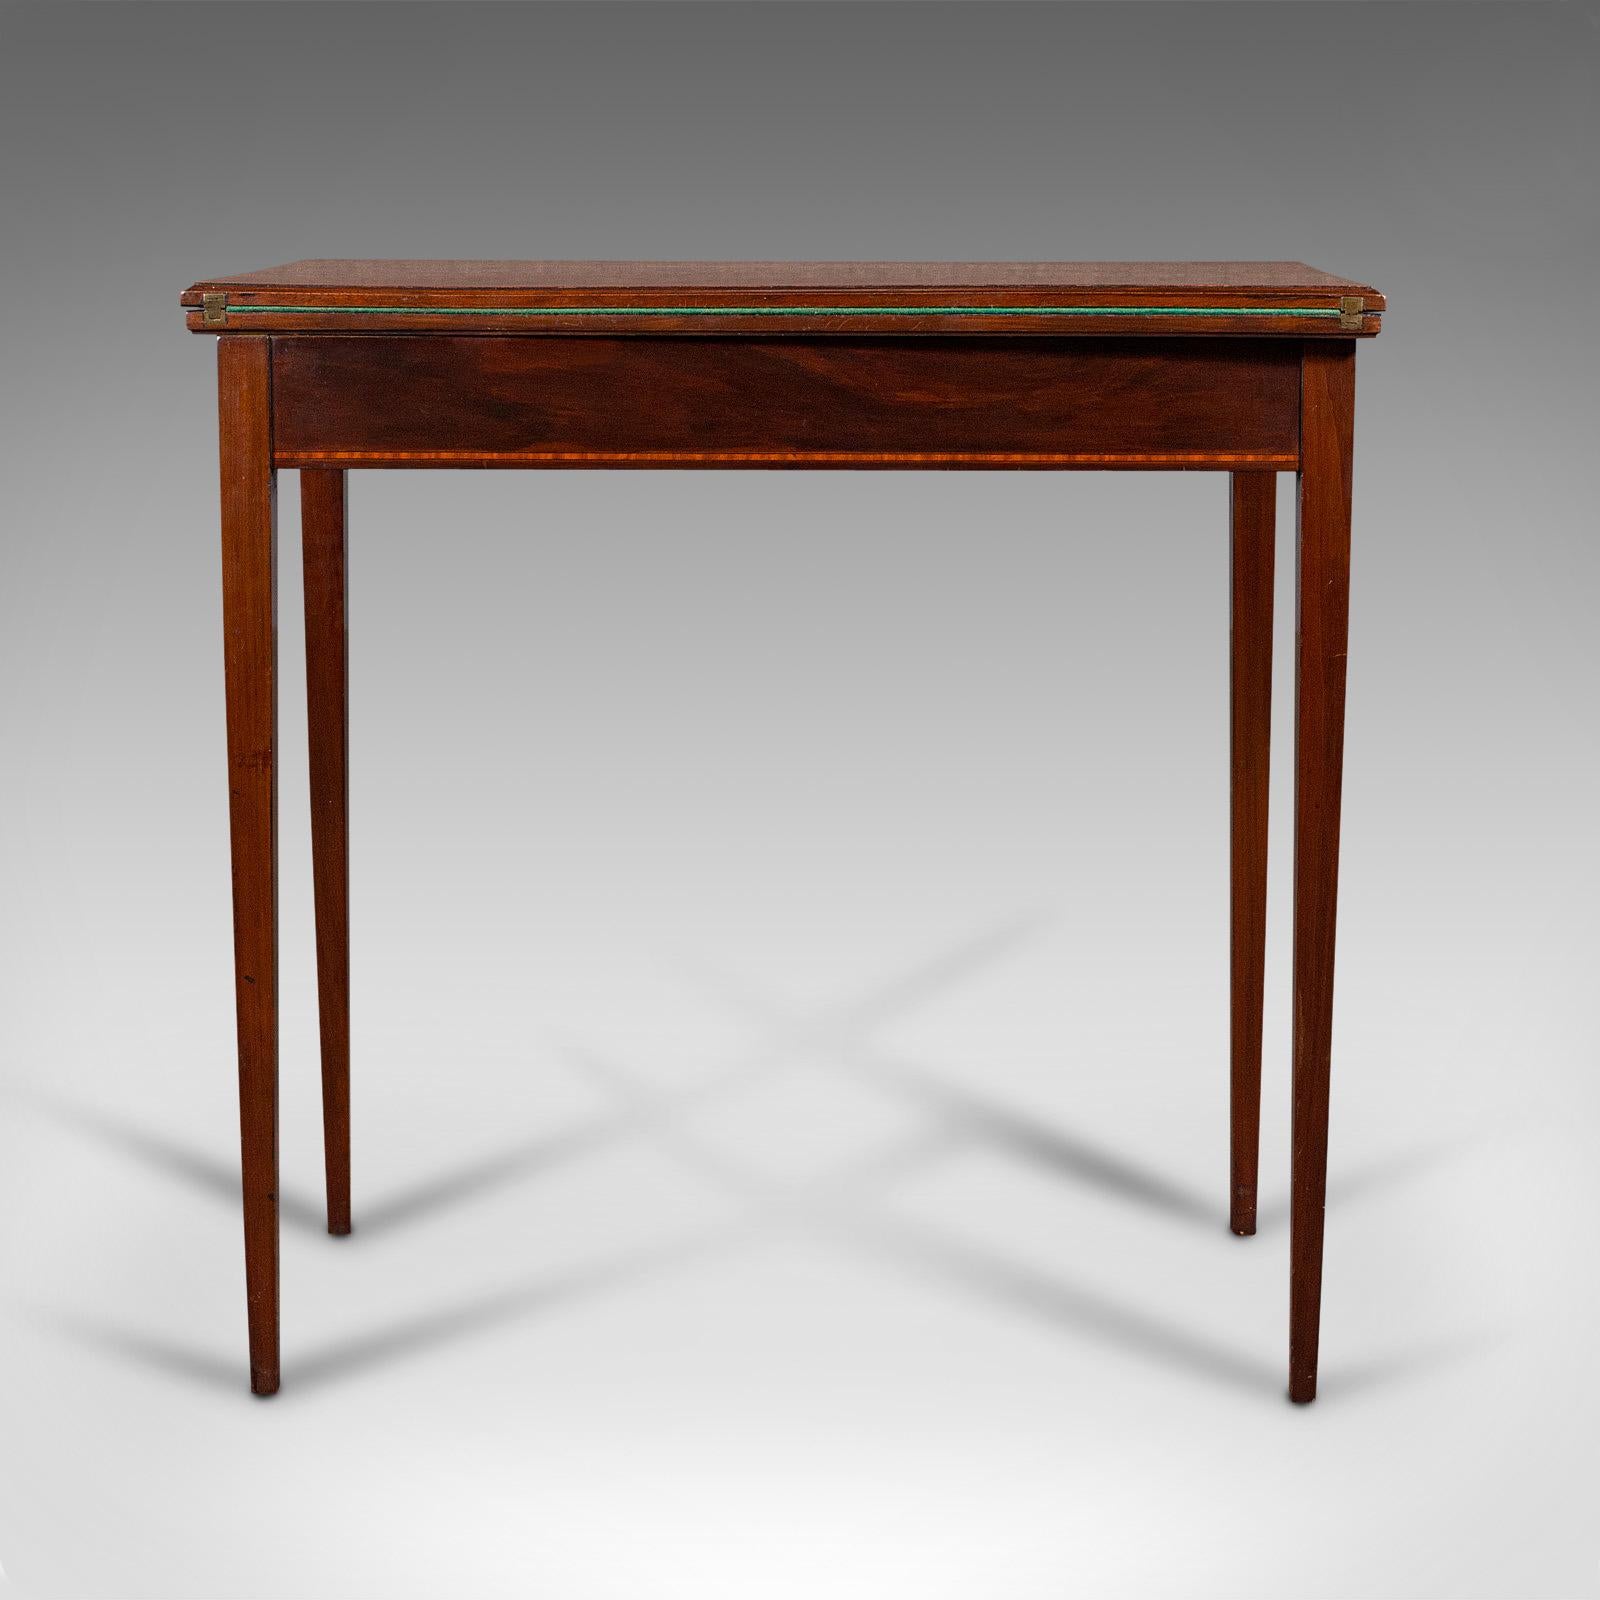 20th Century Antique Fold Over Card Table, English, Mahogany, Games, Occasional, Edwardian